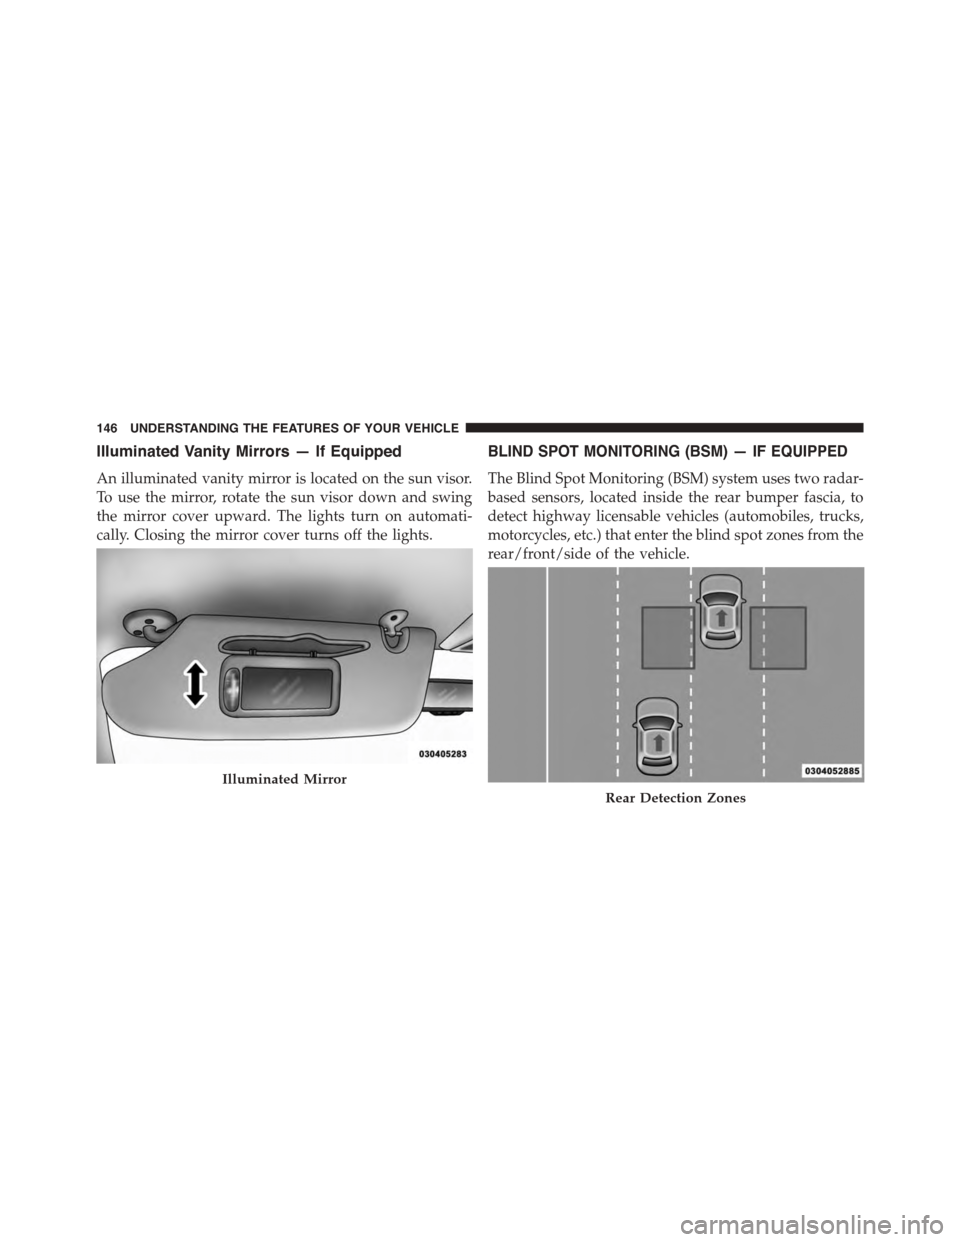 CHRYSLER TOWN AND COUNTRY 2015 5.G Owners Manual Illuminated Vanity Mirrors — If Equipped
An illuminated vanity mirror is located on the sun visor.
To use the mirror, rotate the sun visor down and swing
the mirror cover upward. The lights turn on 